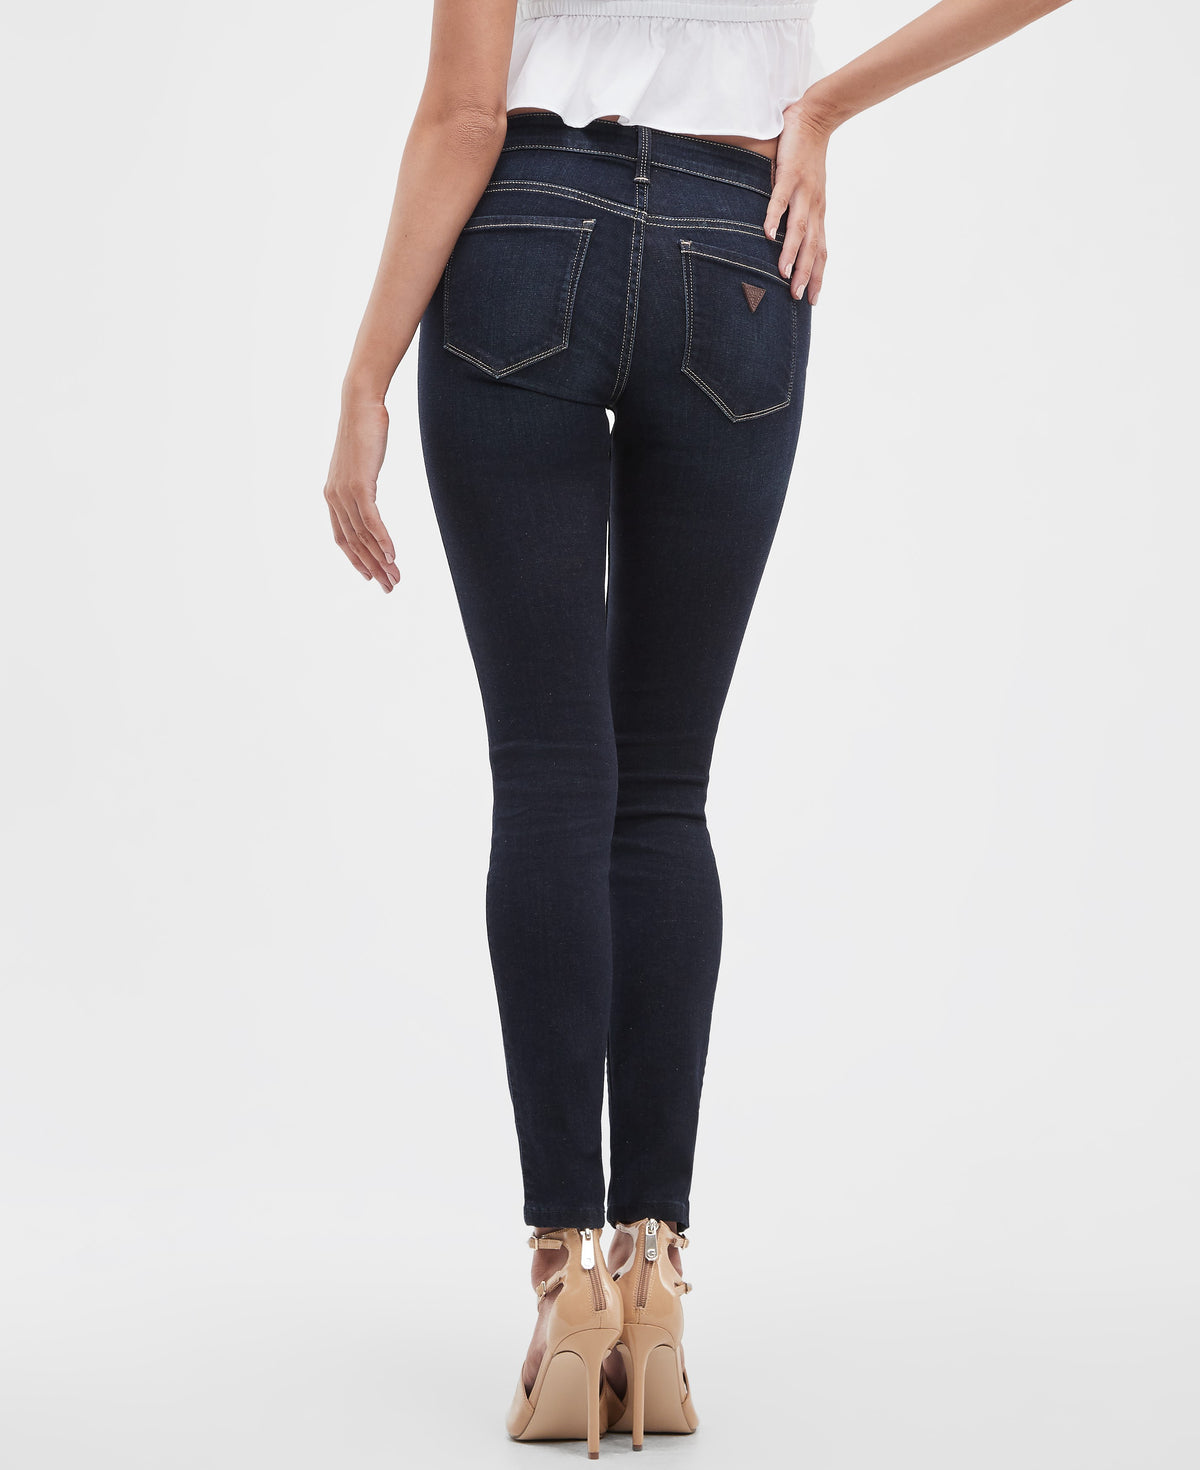 Jeans power skinny GUESS pour femme